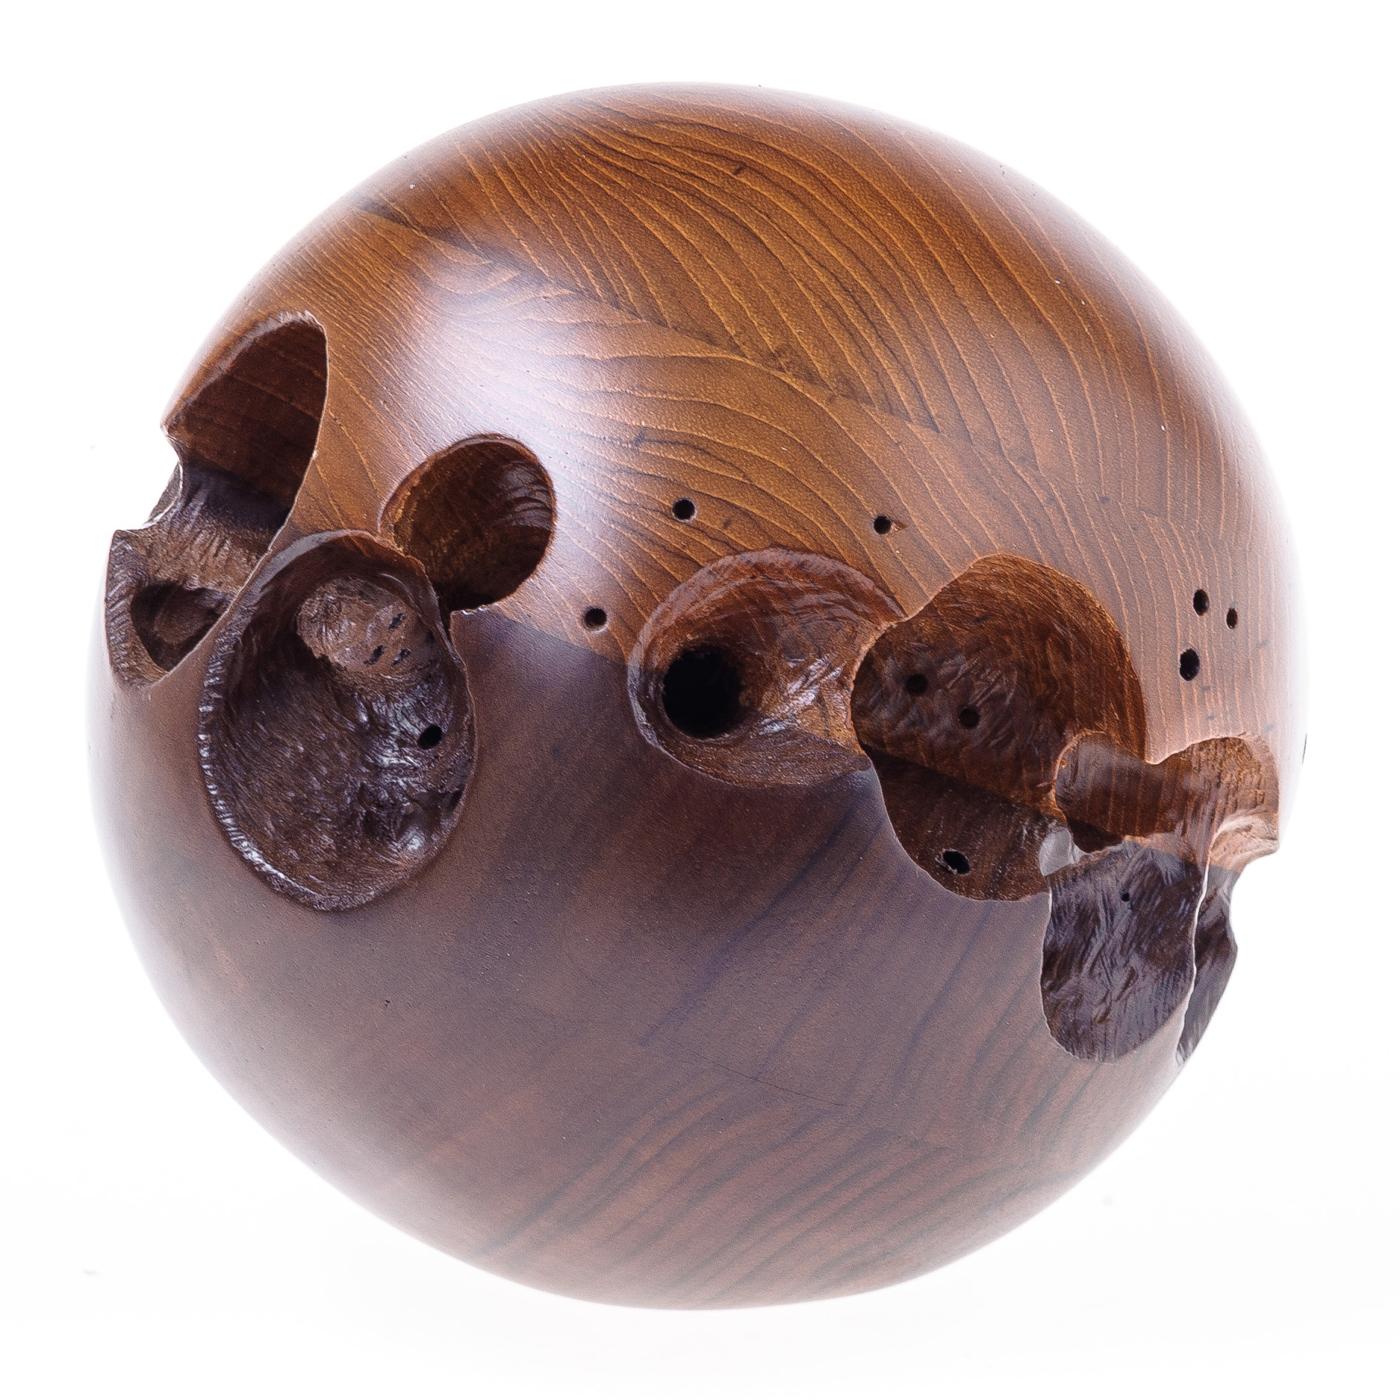 Sophisticated in its simplicity, this wooden sculpture artfully demonstrates superb craftsmanship and Minimalist design aesthetic. This spherical sculpture is handcrafted of teak and Italian walnut, the two halves glued and then manually carved with